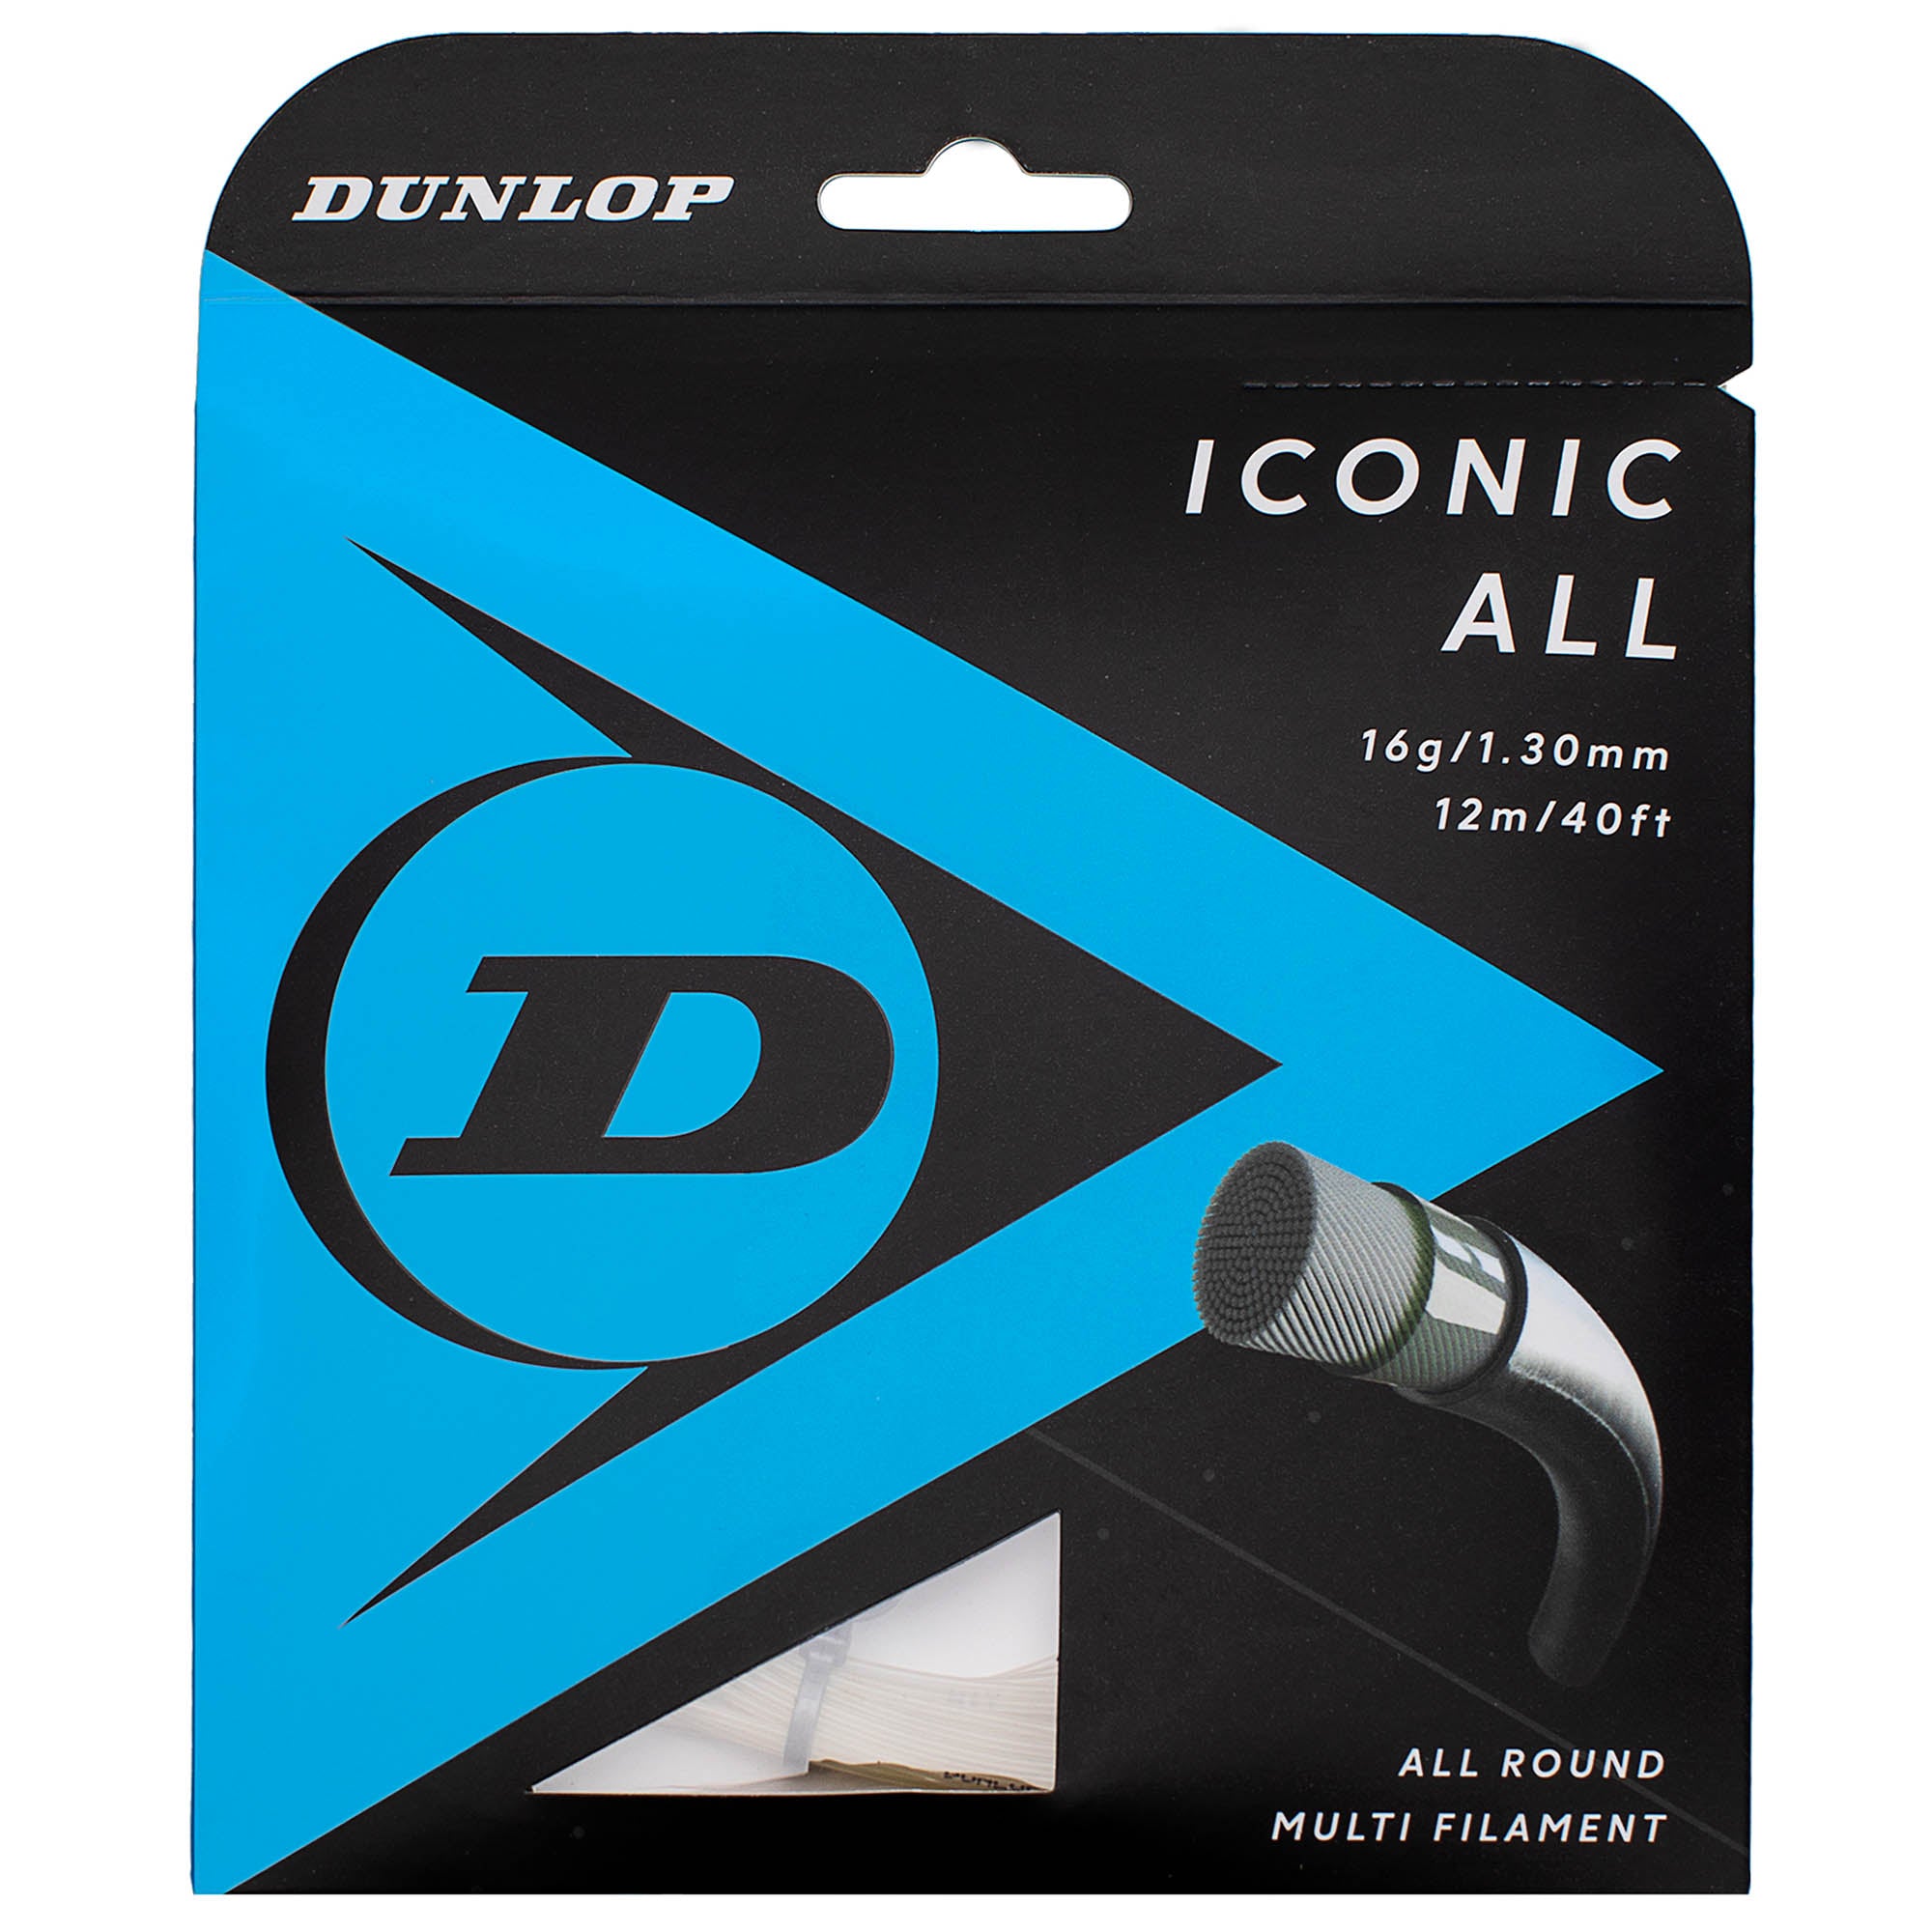 Dunlop Iconic All Tennis String Set